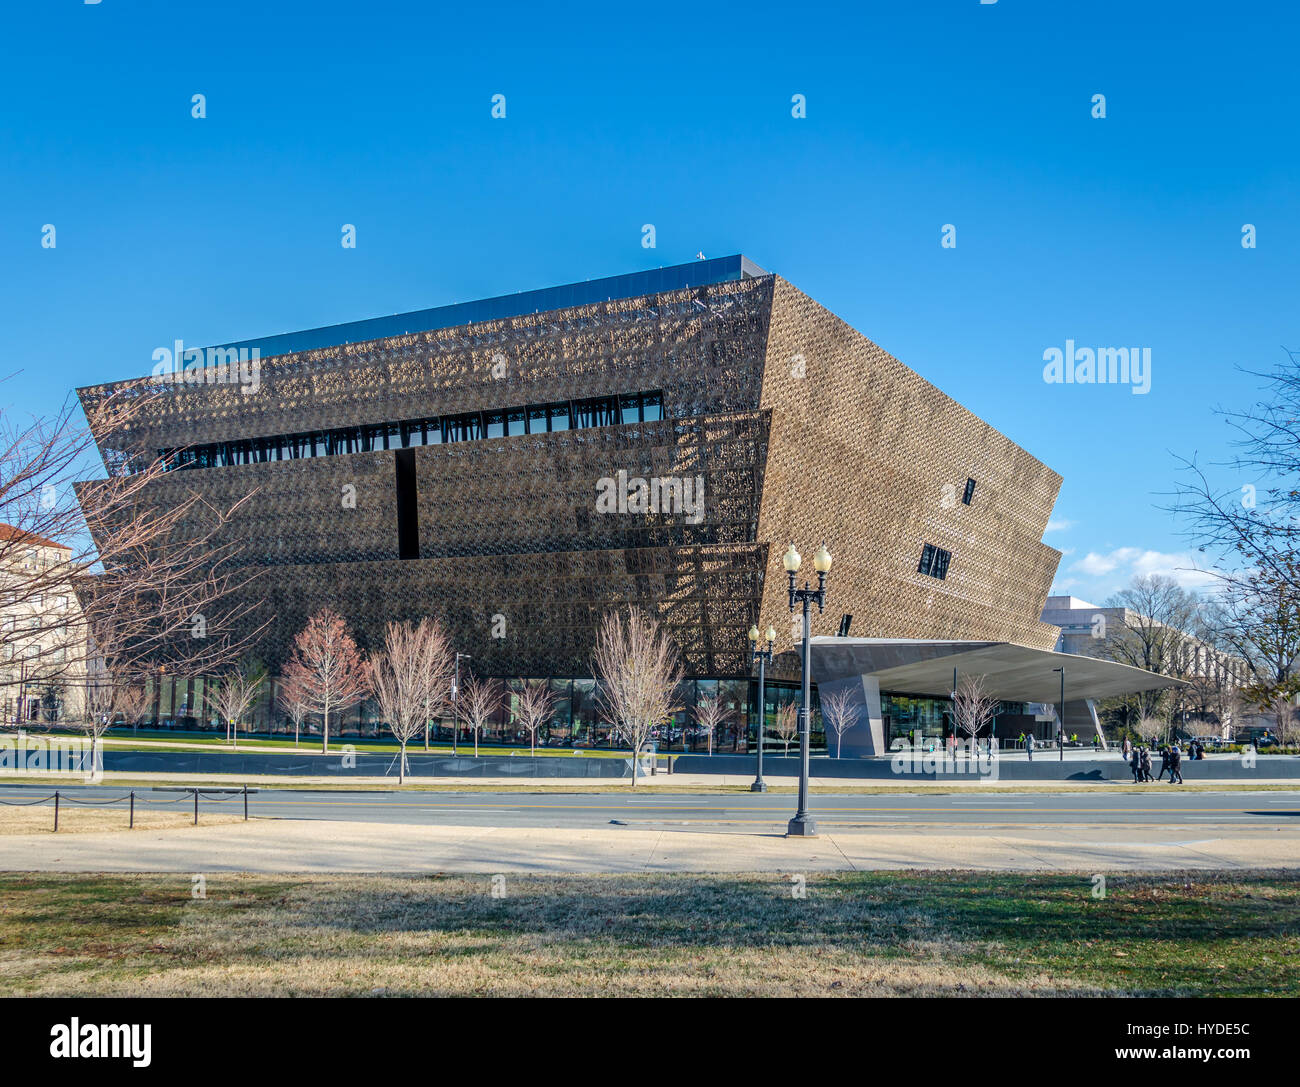 National Museum of African American History and Culture - Washington, D.C., USA Stock Photo